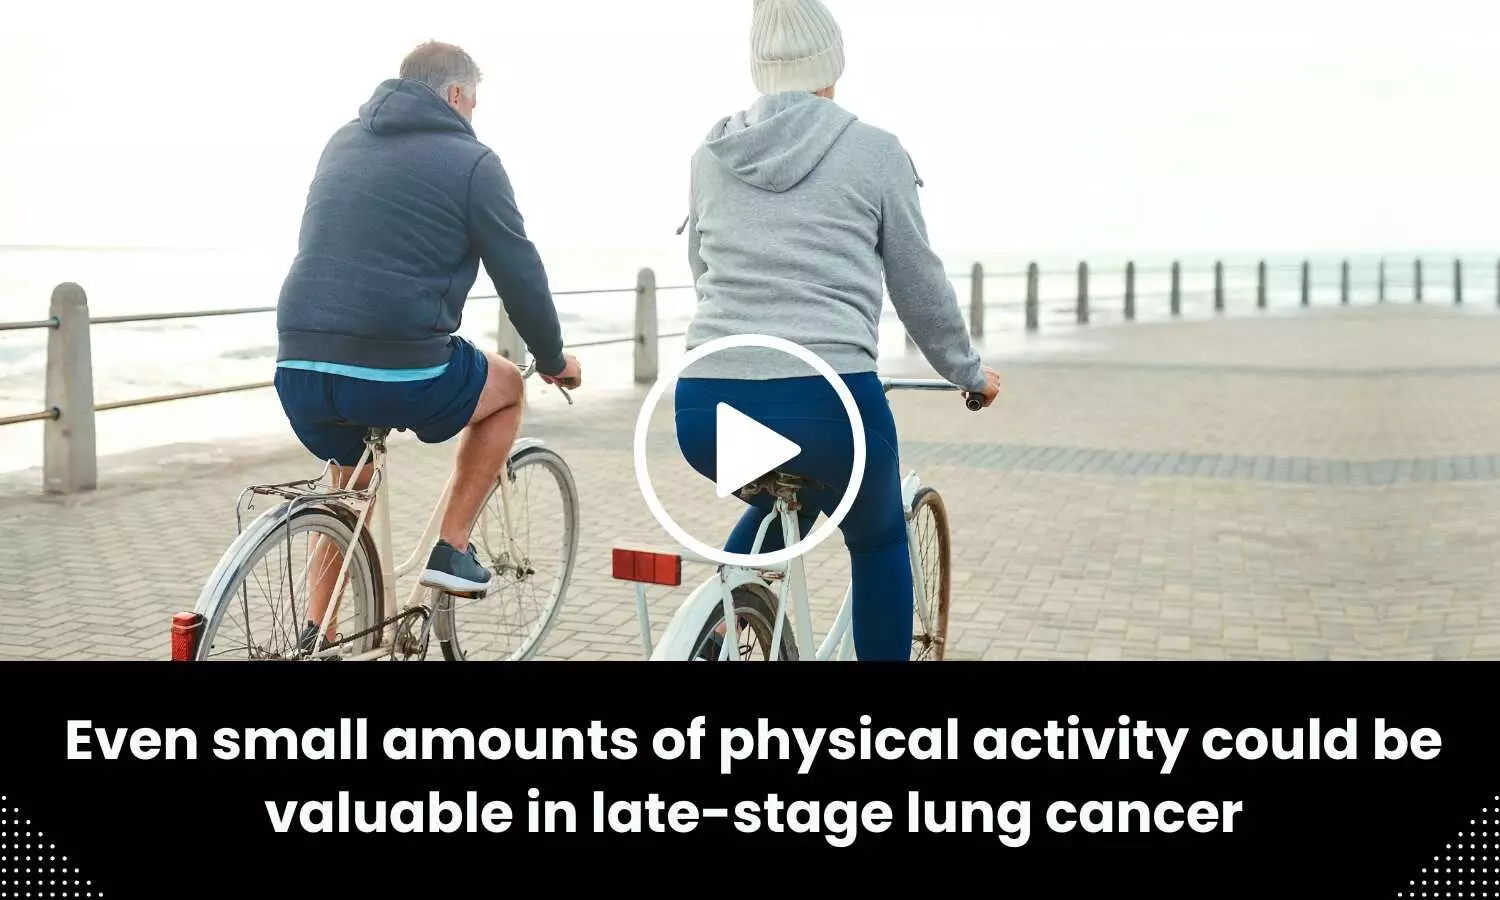 Even little physical activity could be valuable in late-stage lung cancer